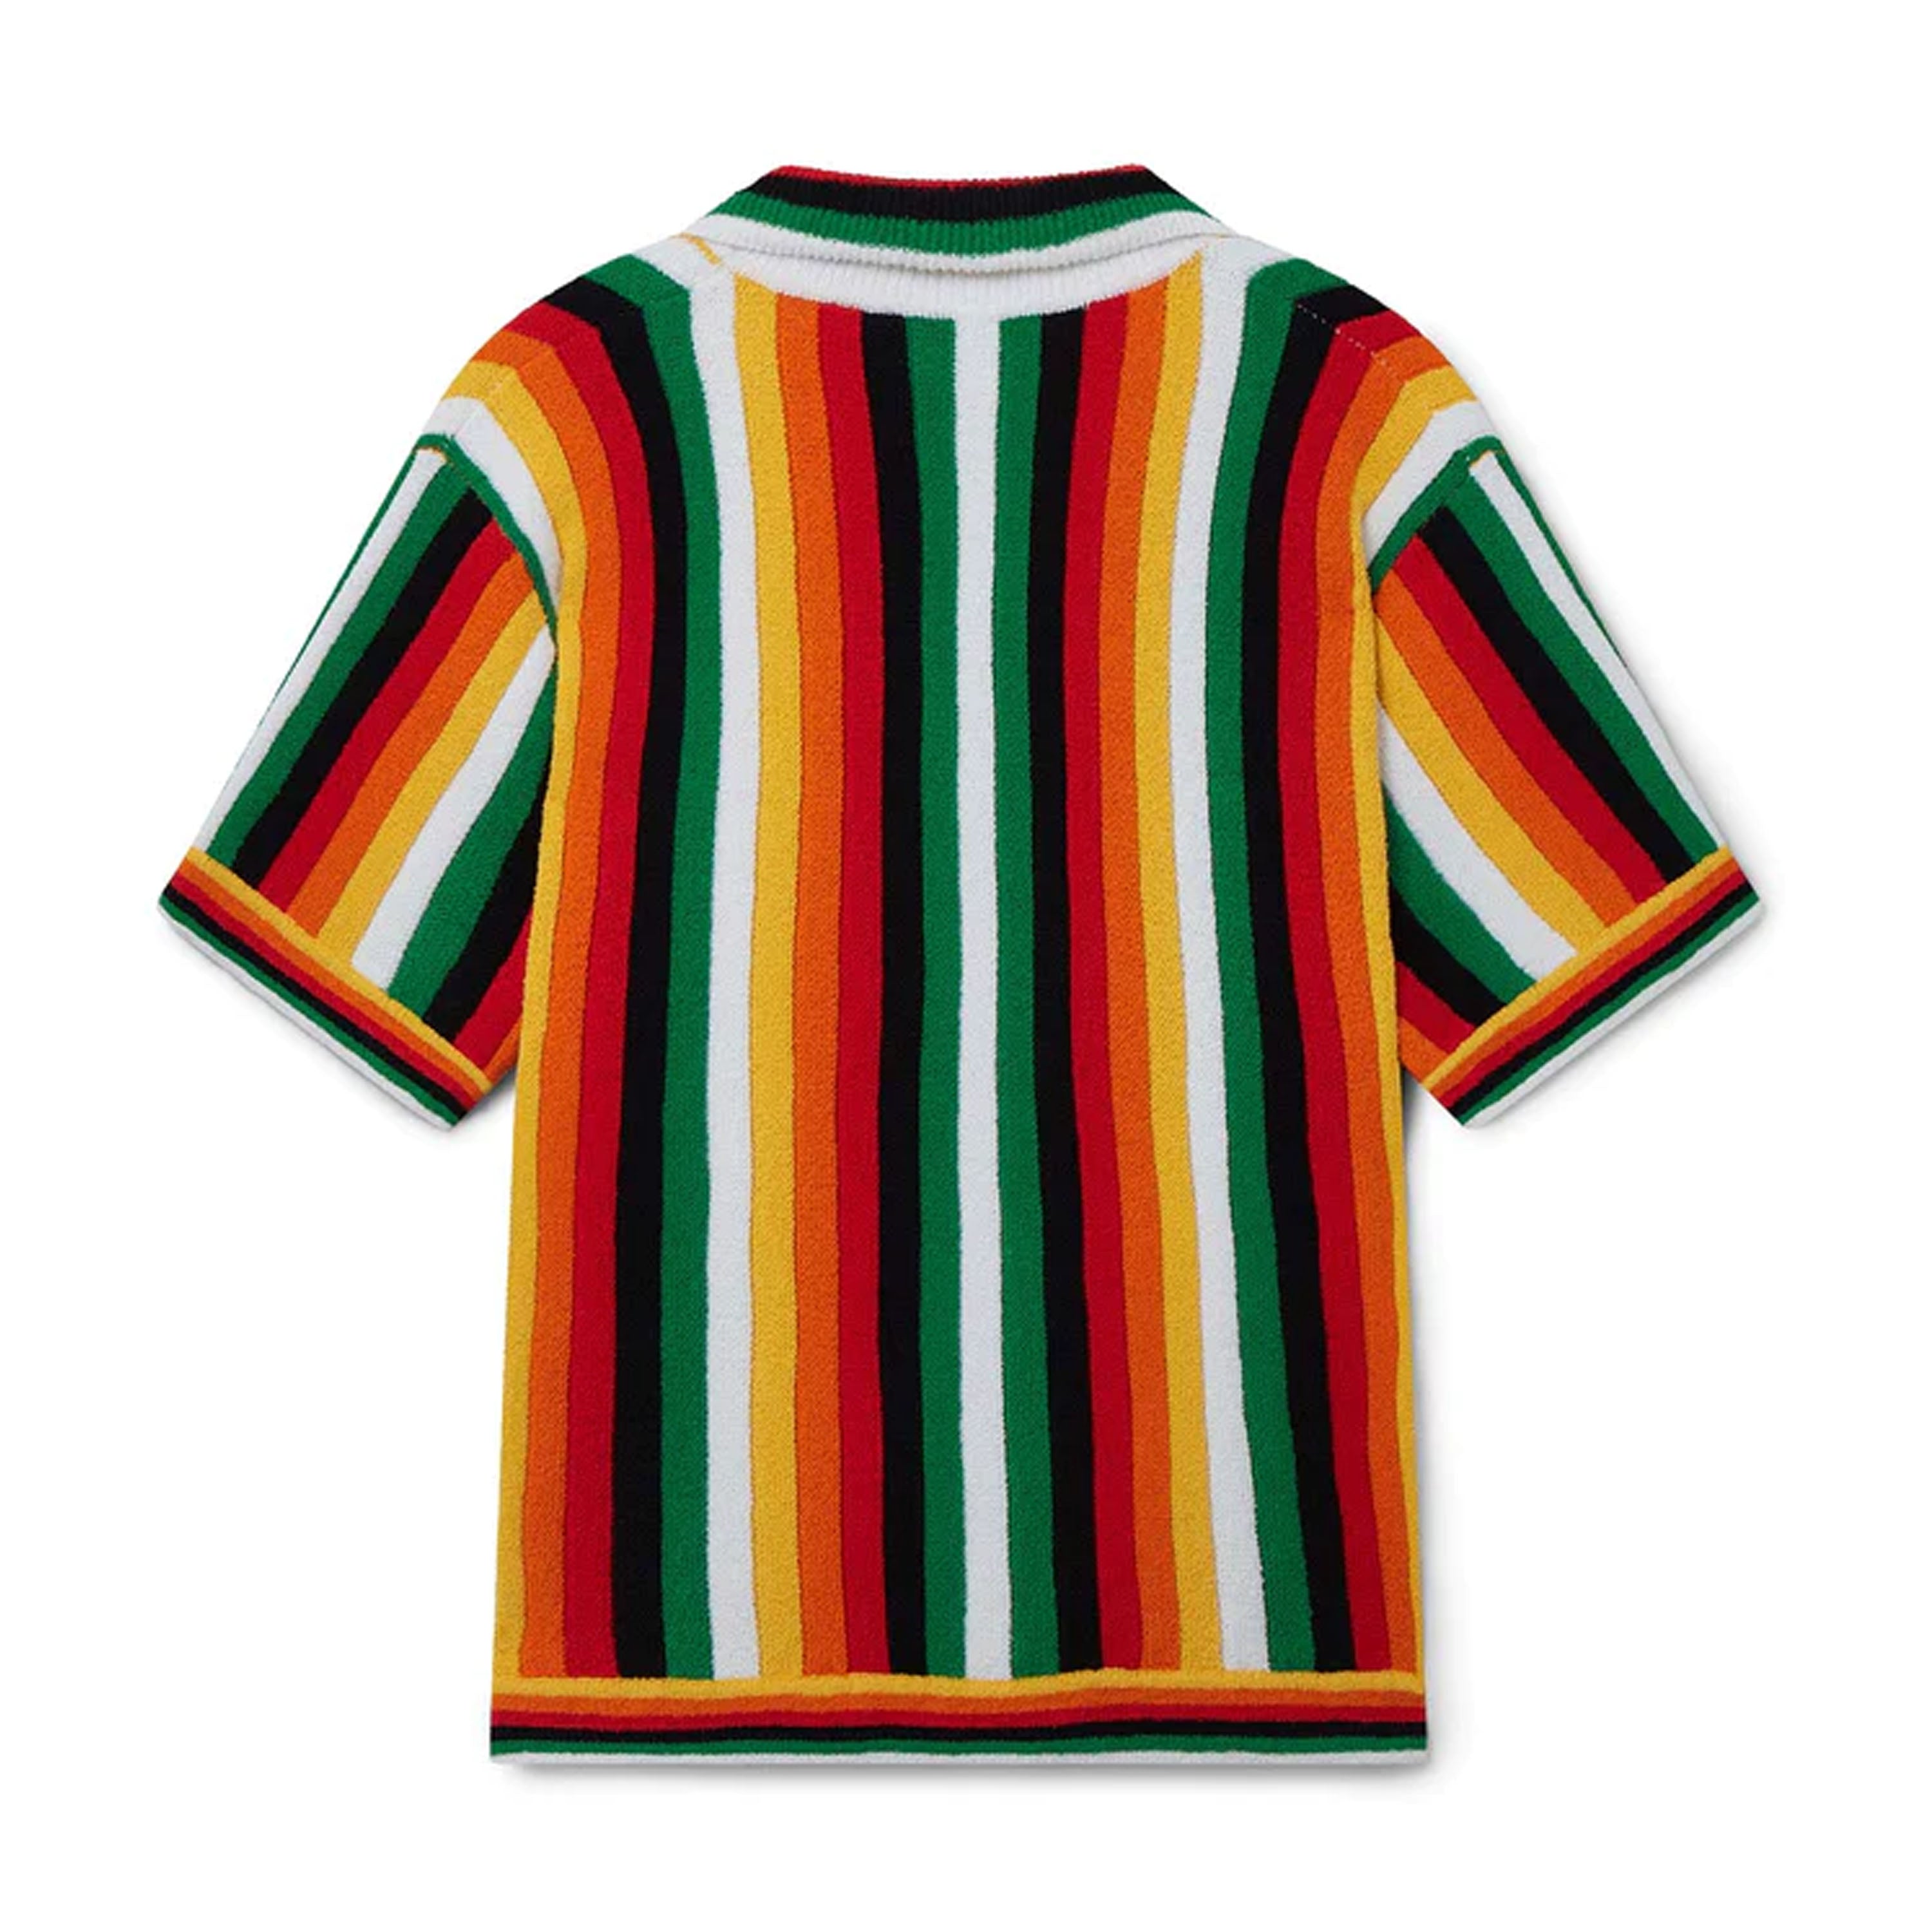 Striped Toweling Shirt